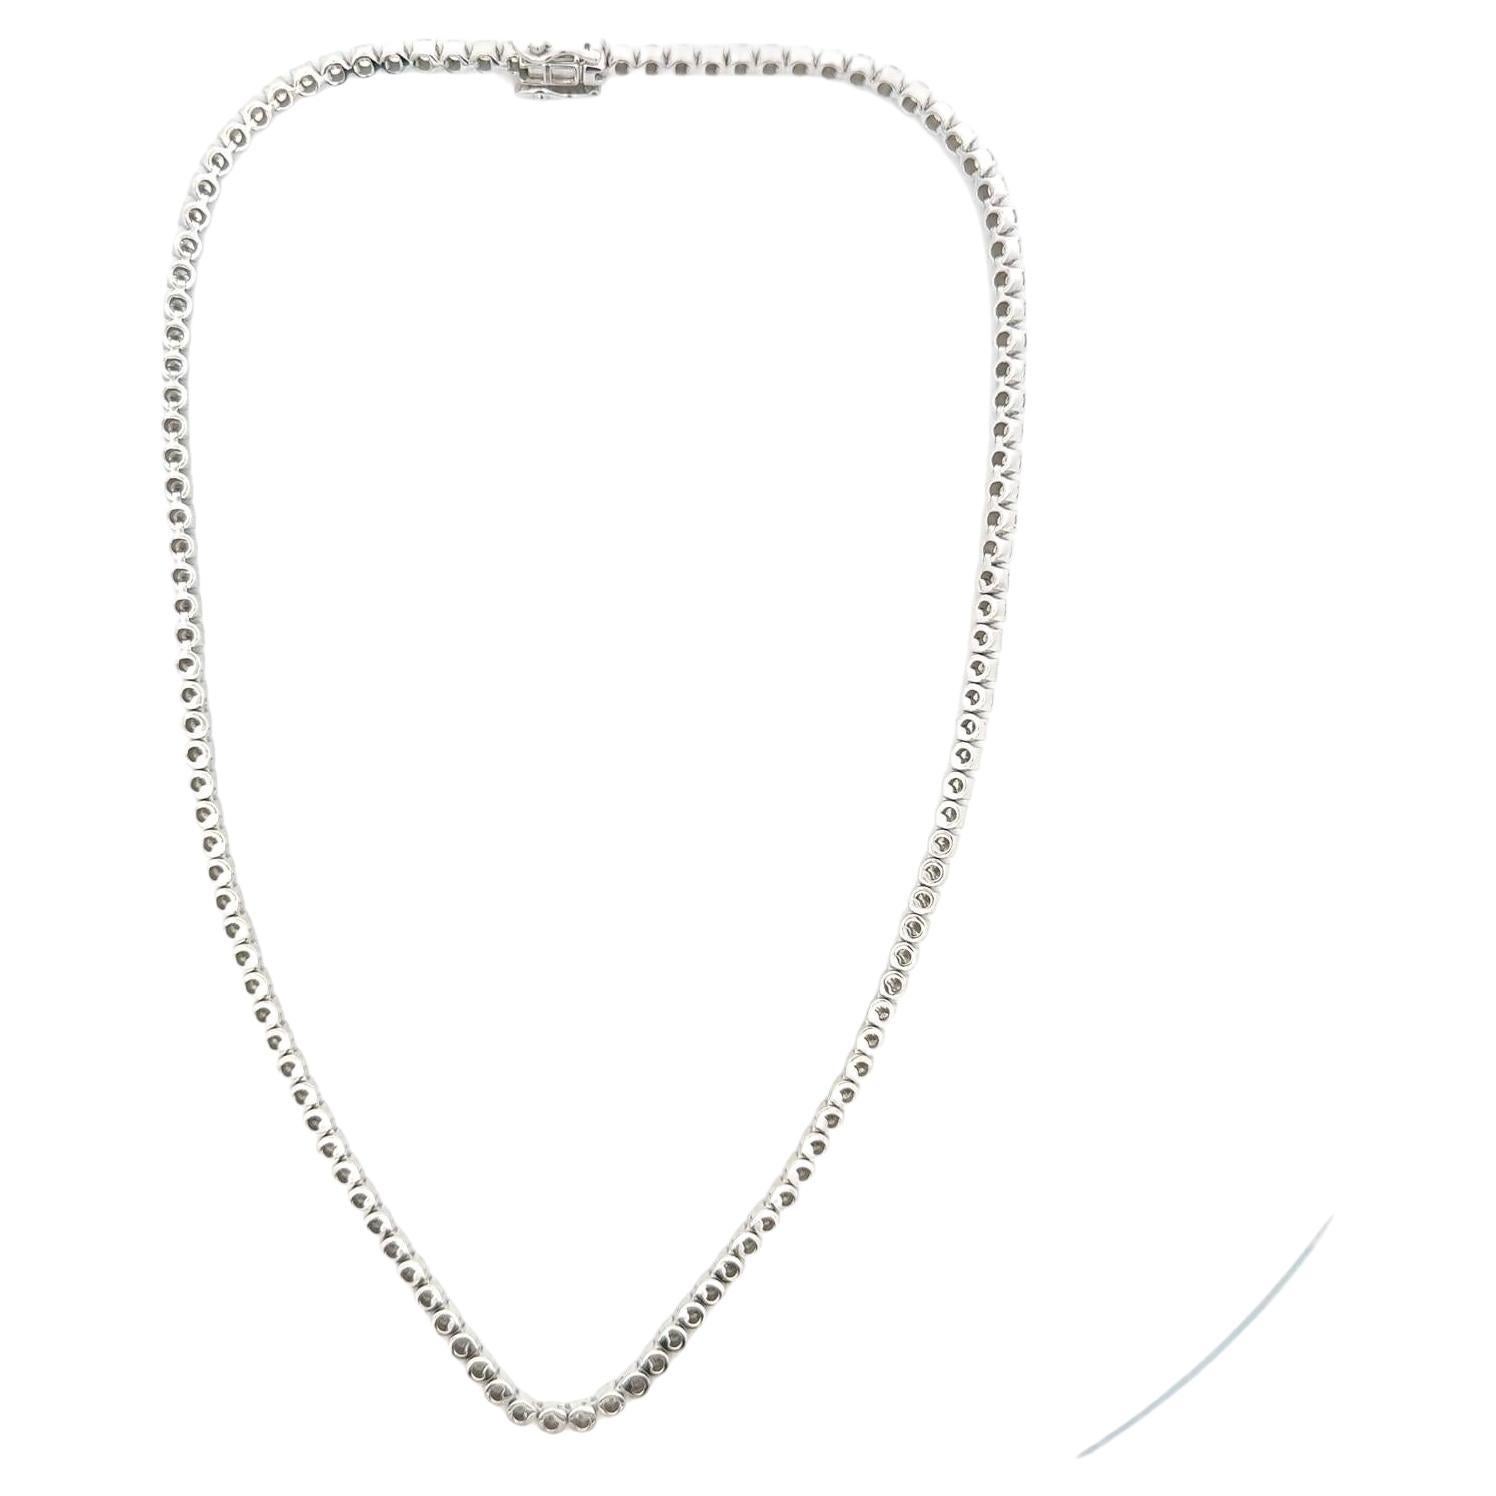 Modern diamond tennis necklace crafted in 14 karat white gold. The necklace features 121 round brilliant cut diamonds weighing approximately 12.0 carat total weight. The diamonds are graded H-I color and SI clarity. The necklace measures 16 inches